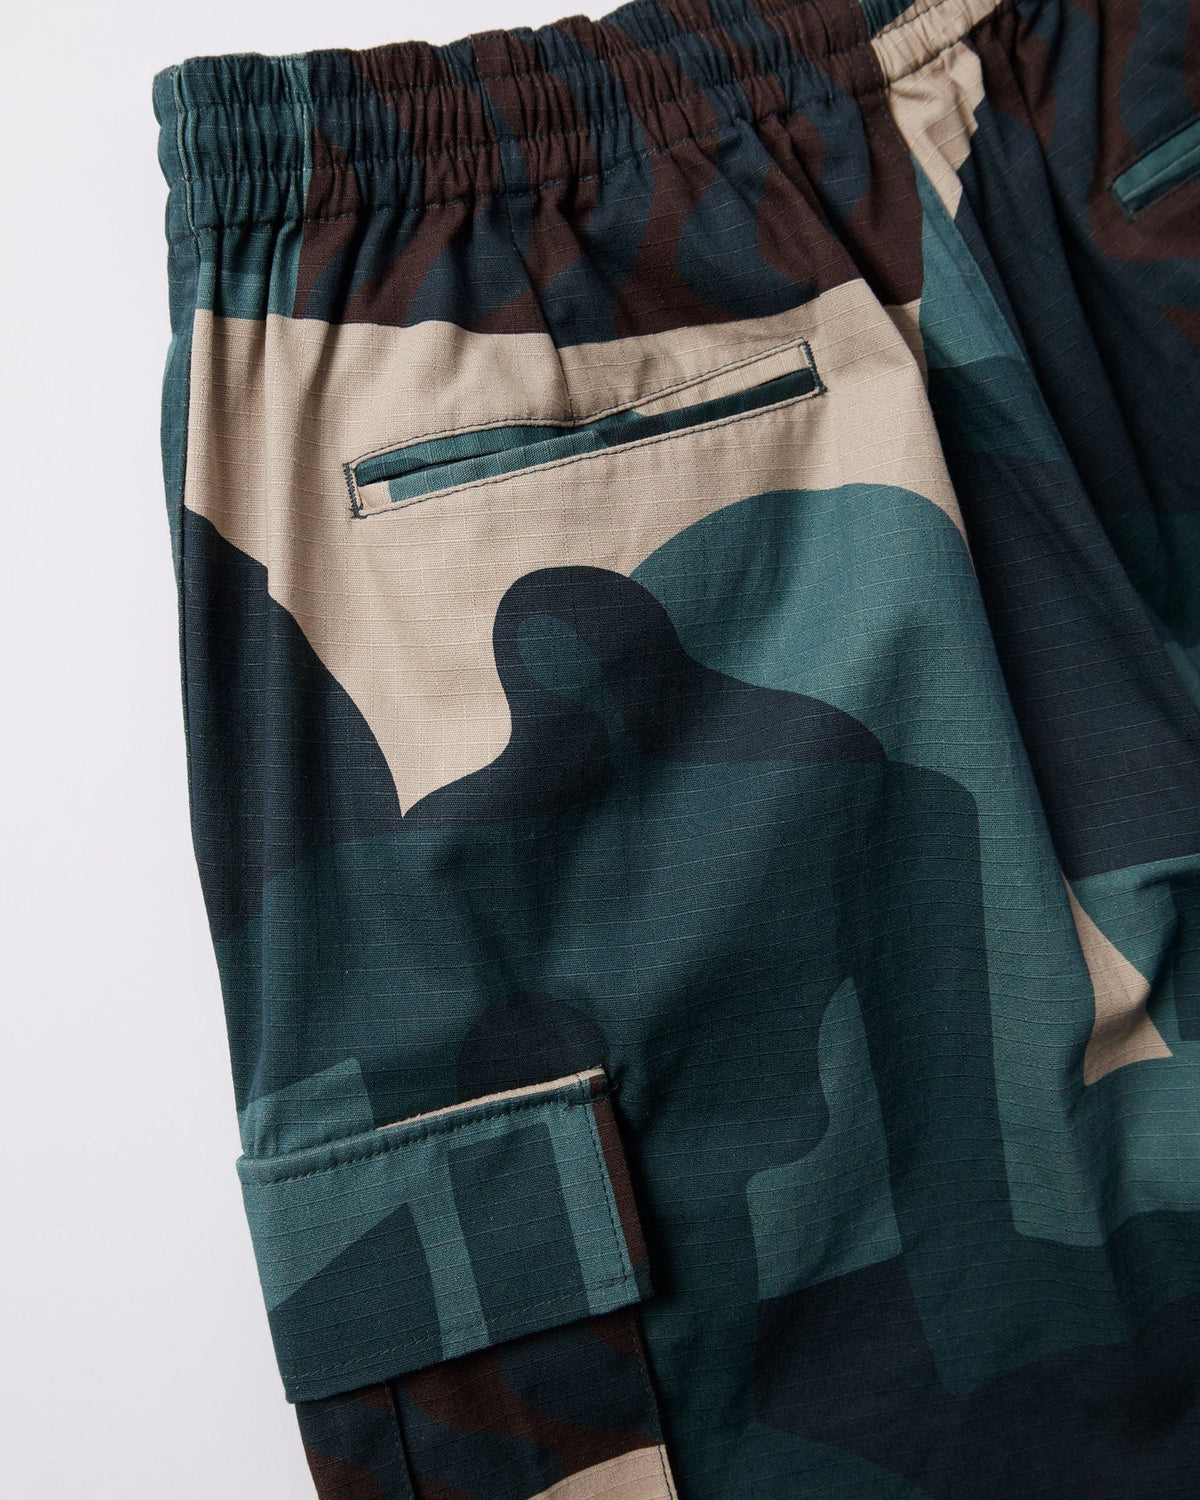 BY PARRA DISTORTED CAMO SHORTS